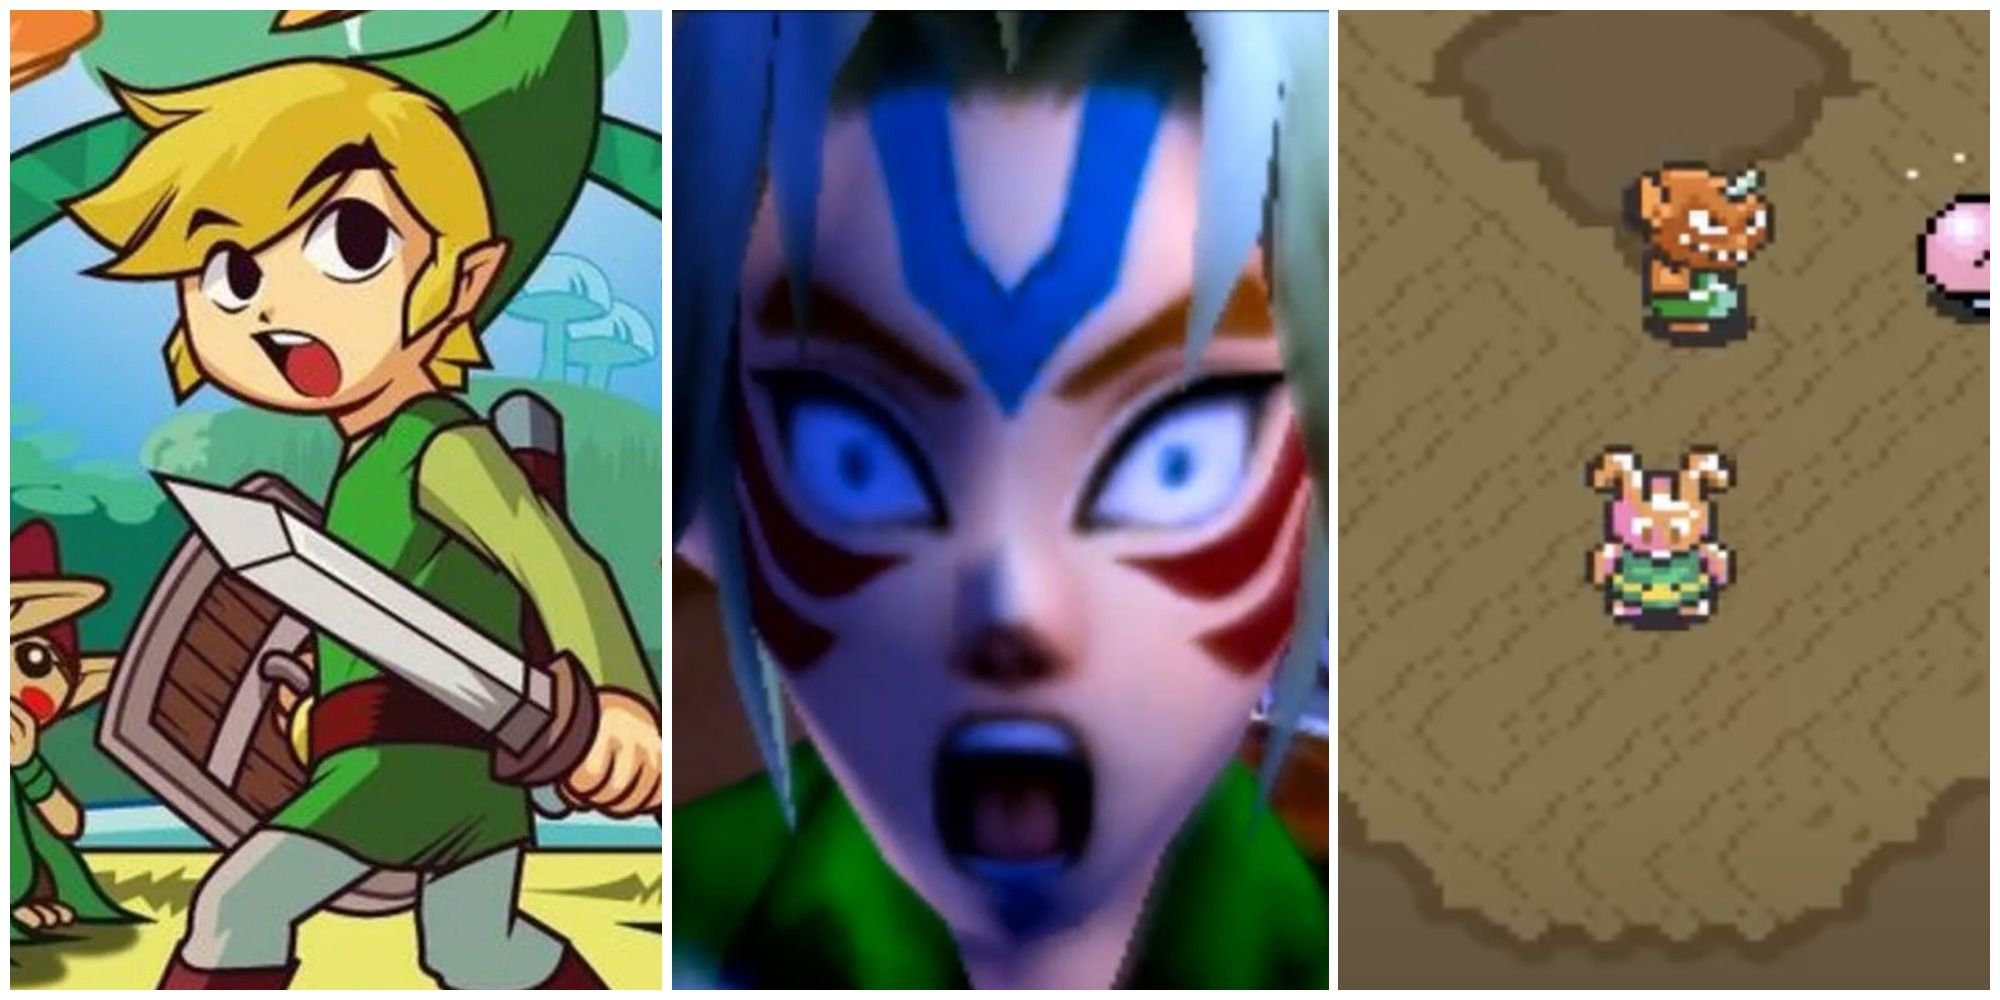 Hidden ages of Link's forms - 7 Cool Things About Zelda: Majora's Mask  (Part 10) 